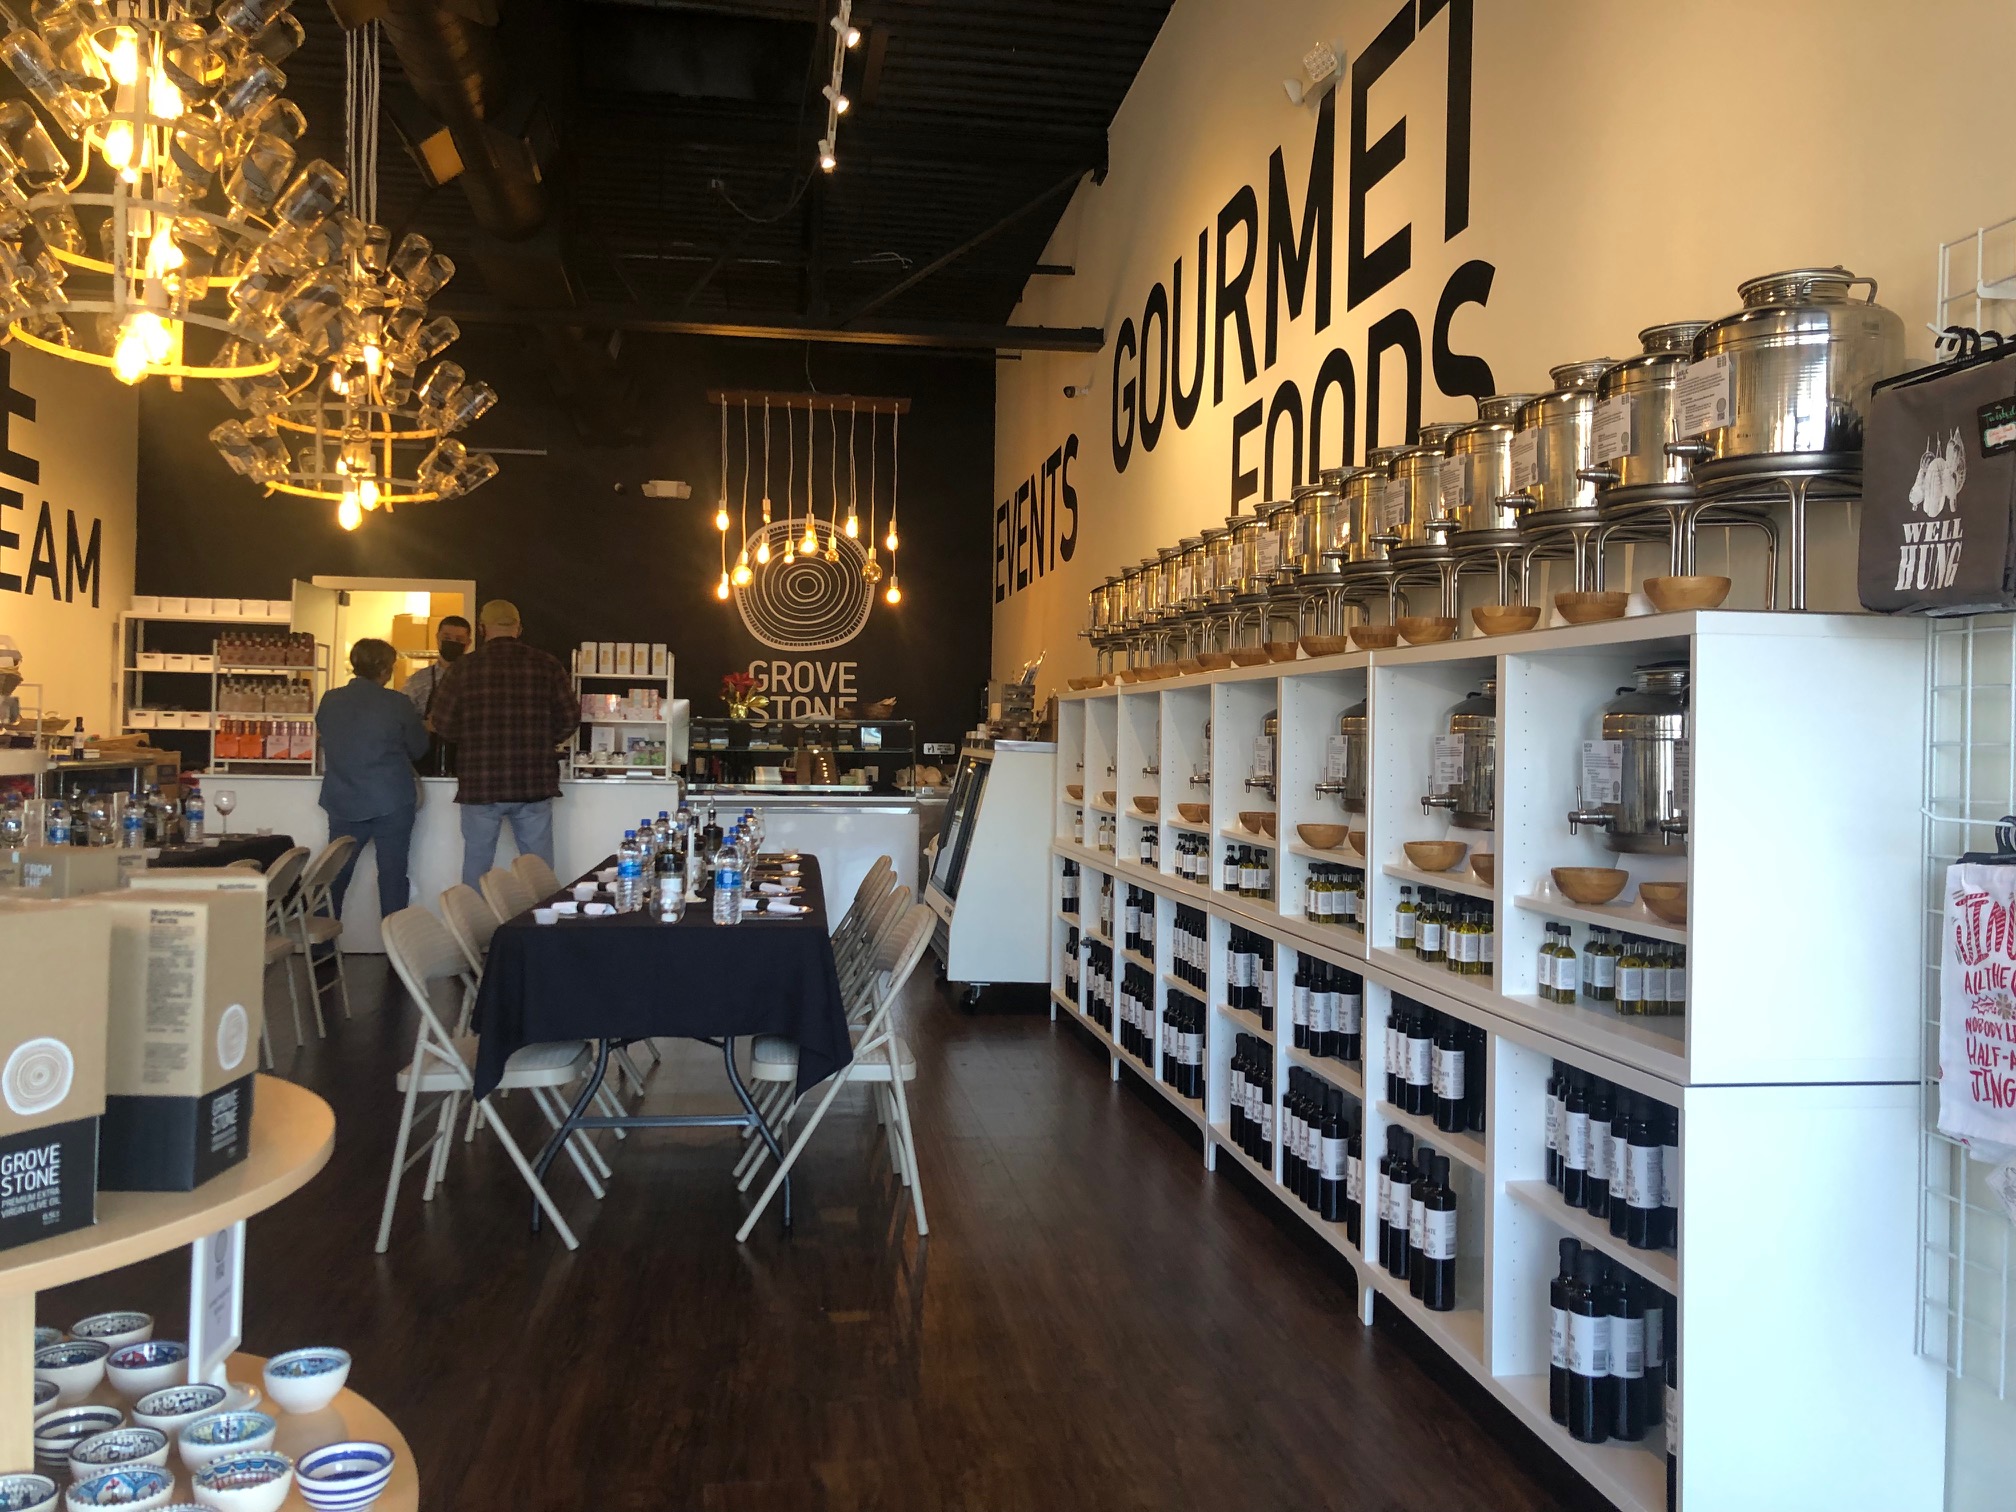 Inside Grovestone, there are white shelves on both left and right sides of the room filled with bottles of olive oil and vinegar. There is a long rectangular table with a black tablecloth and place settings. There are two customers checking out and a male masked cashier facing the camera. Photo by Alyssa Buckley.